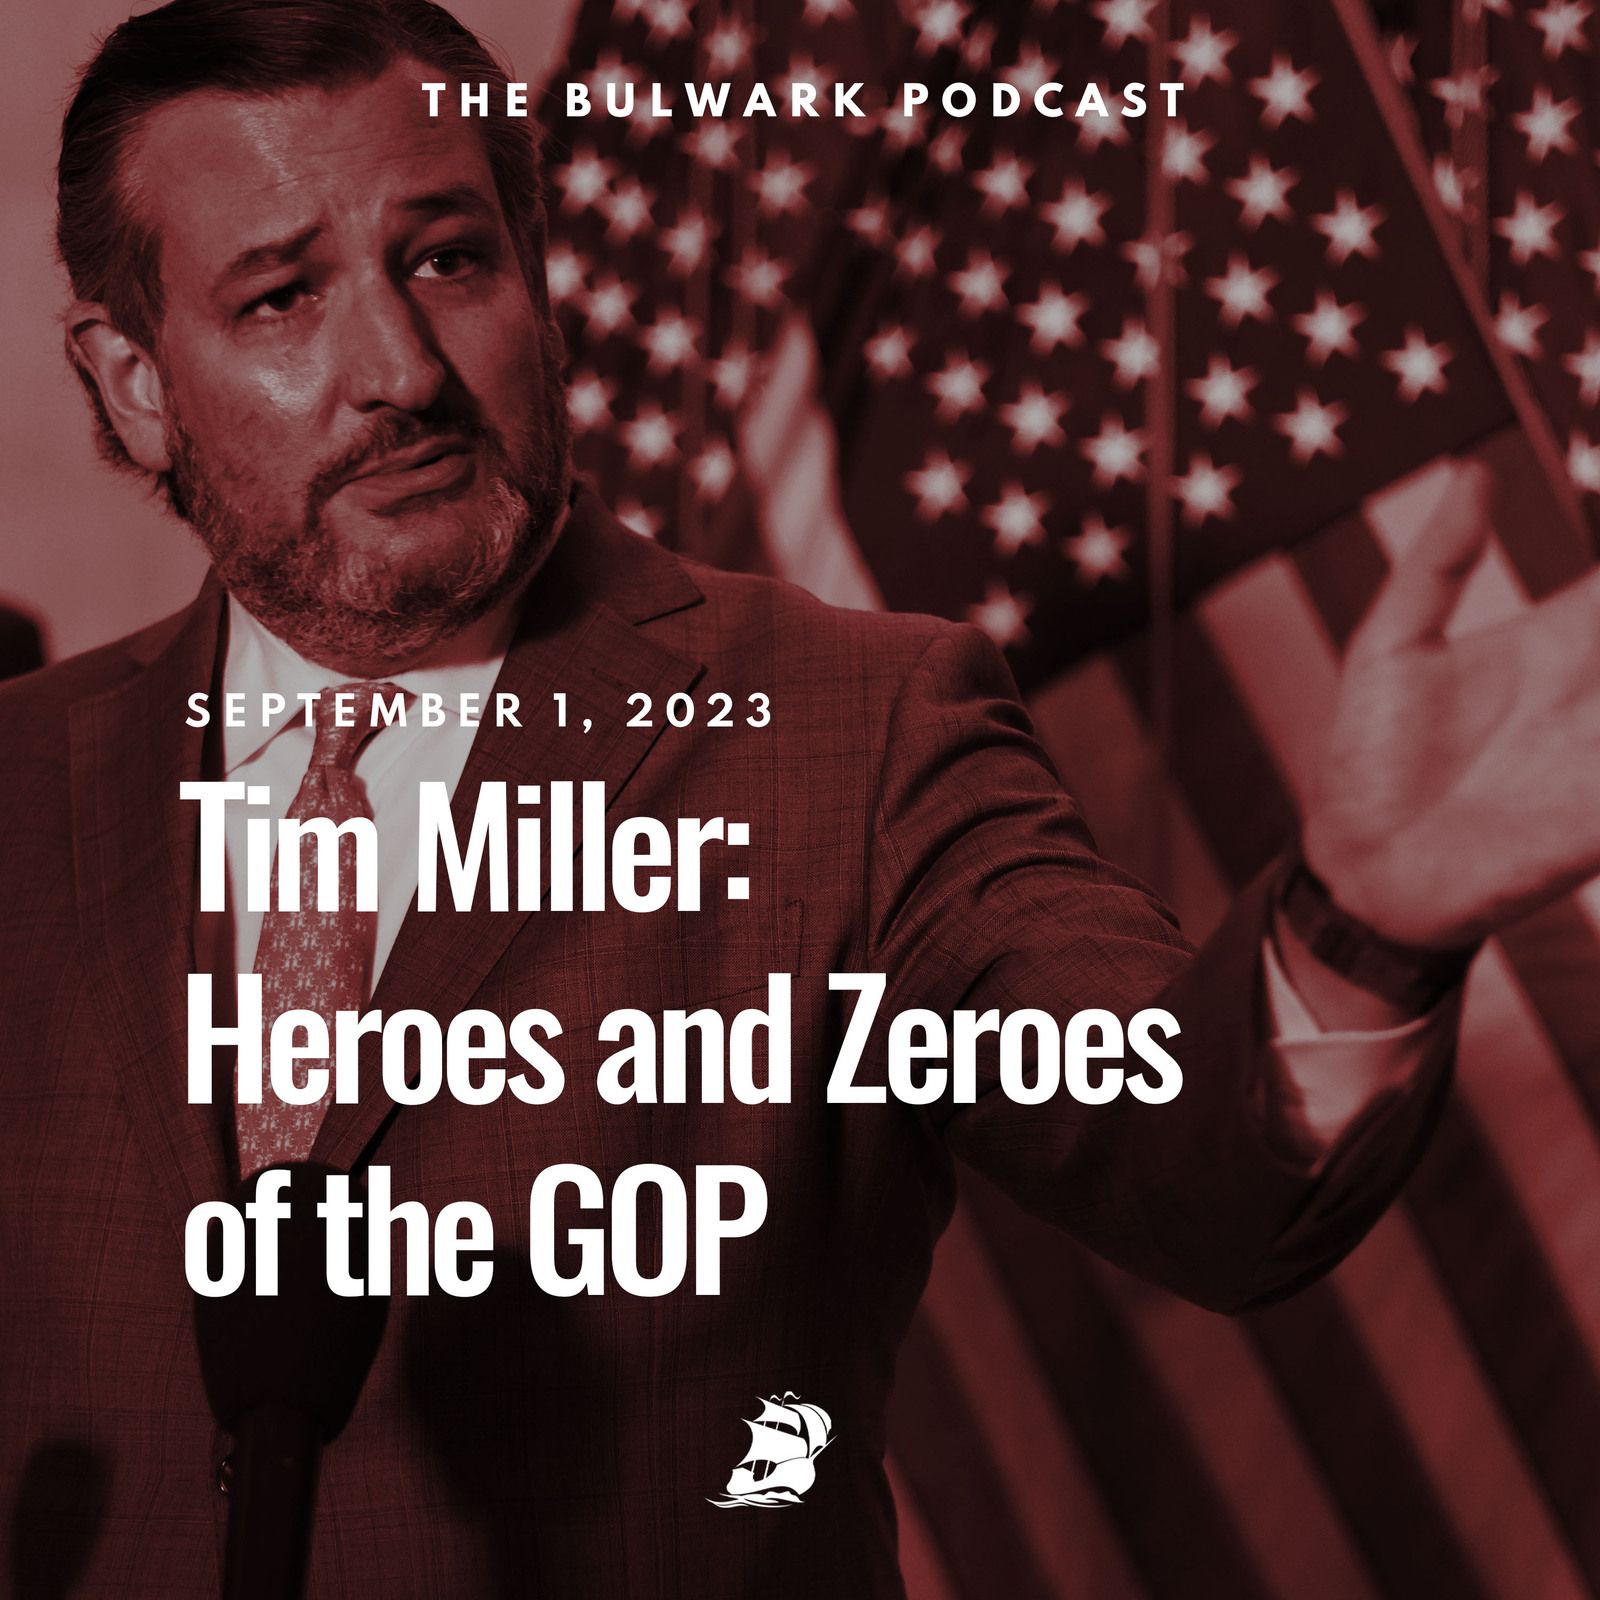 Tim Miller: Heroes and Zeroes of the GOP